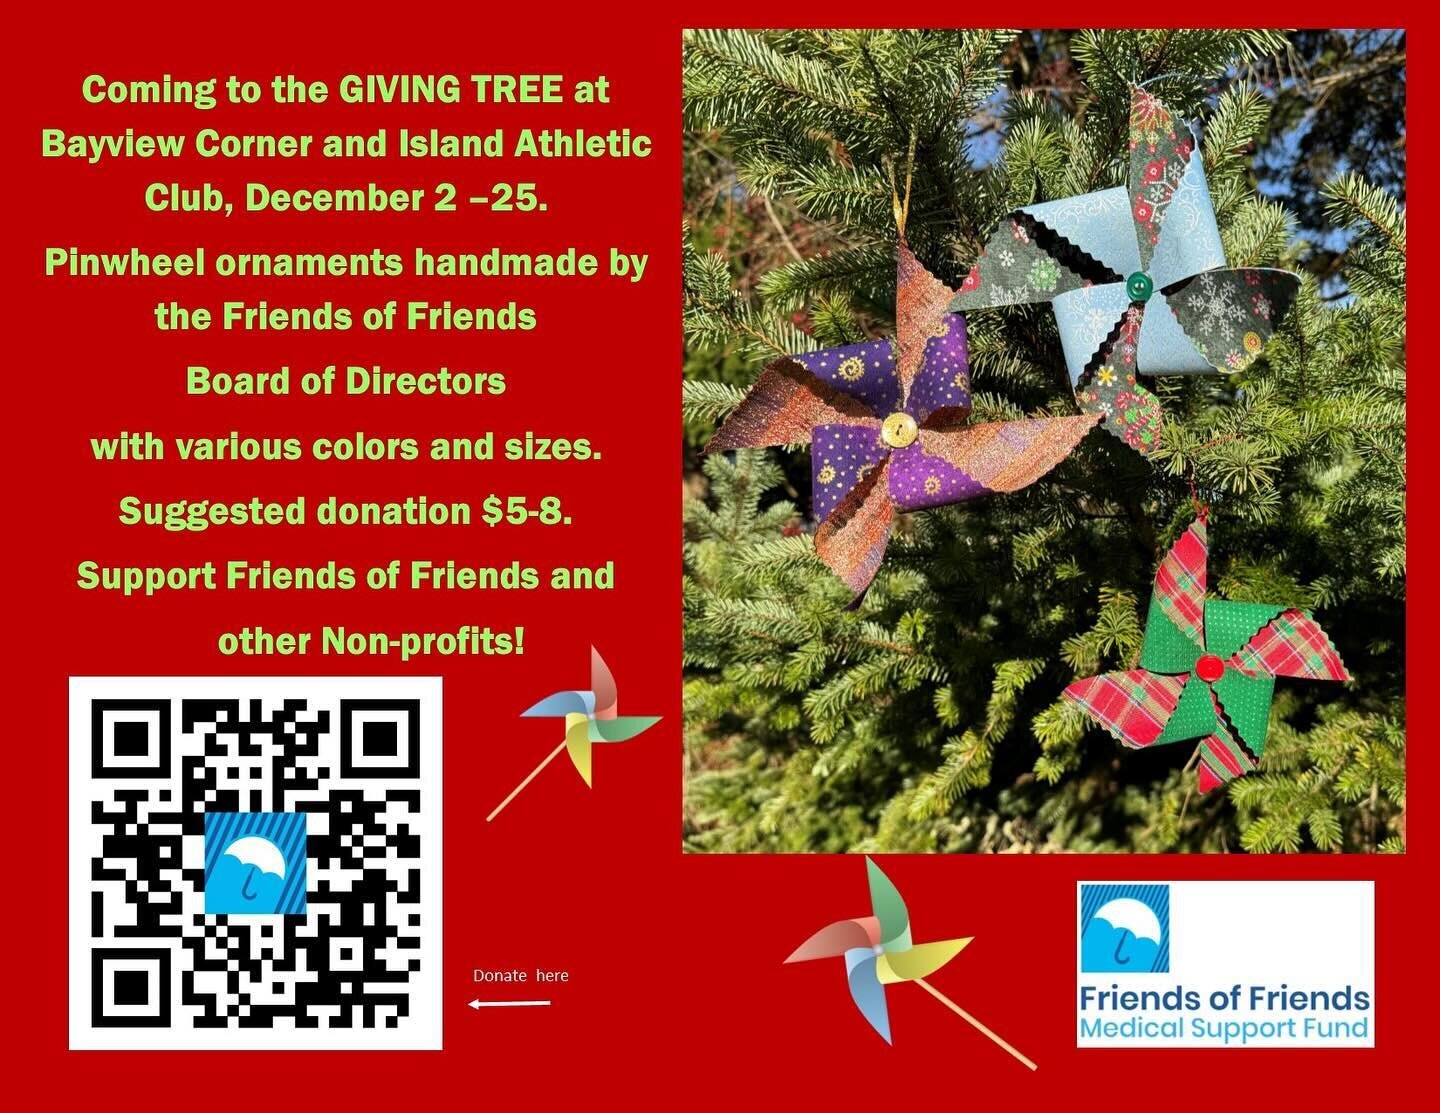 The Goosefoot Giving Tree is open this Saturday 12/2! Check out Friends of Friends&rsquo; handmade pinwheels to decorate your tree and support your favorite nonprofit! At Bayview Corner and the Island Athletic Club.